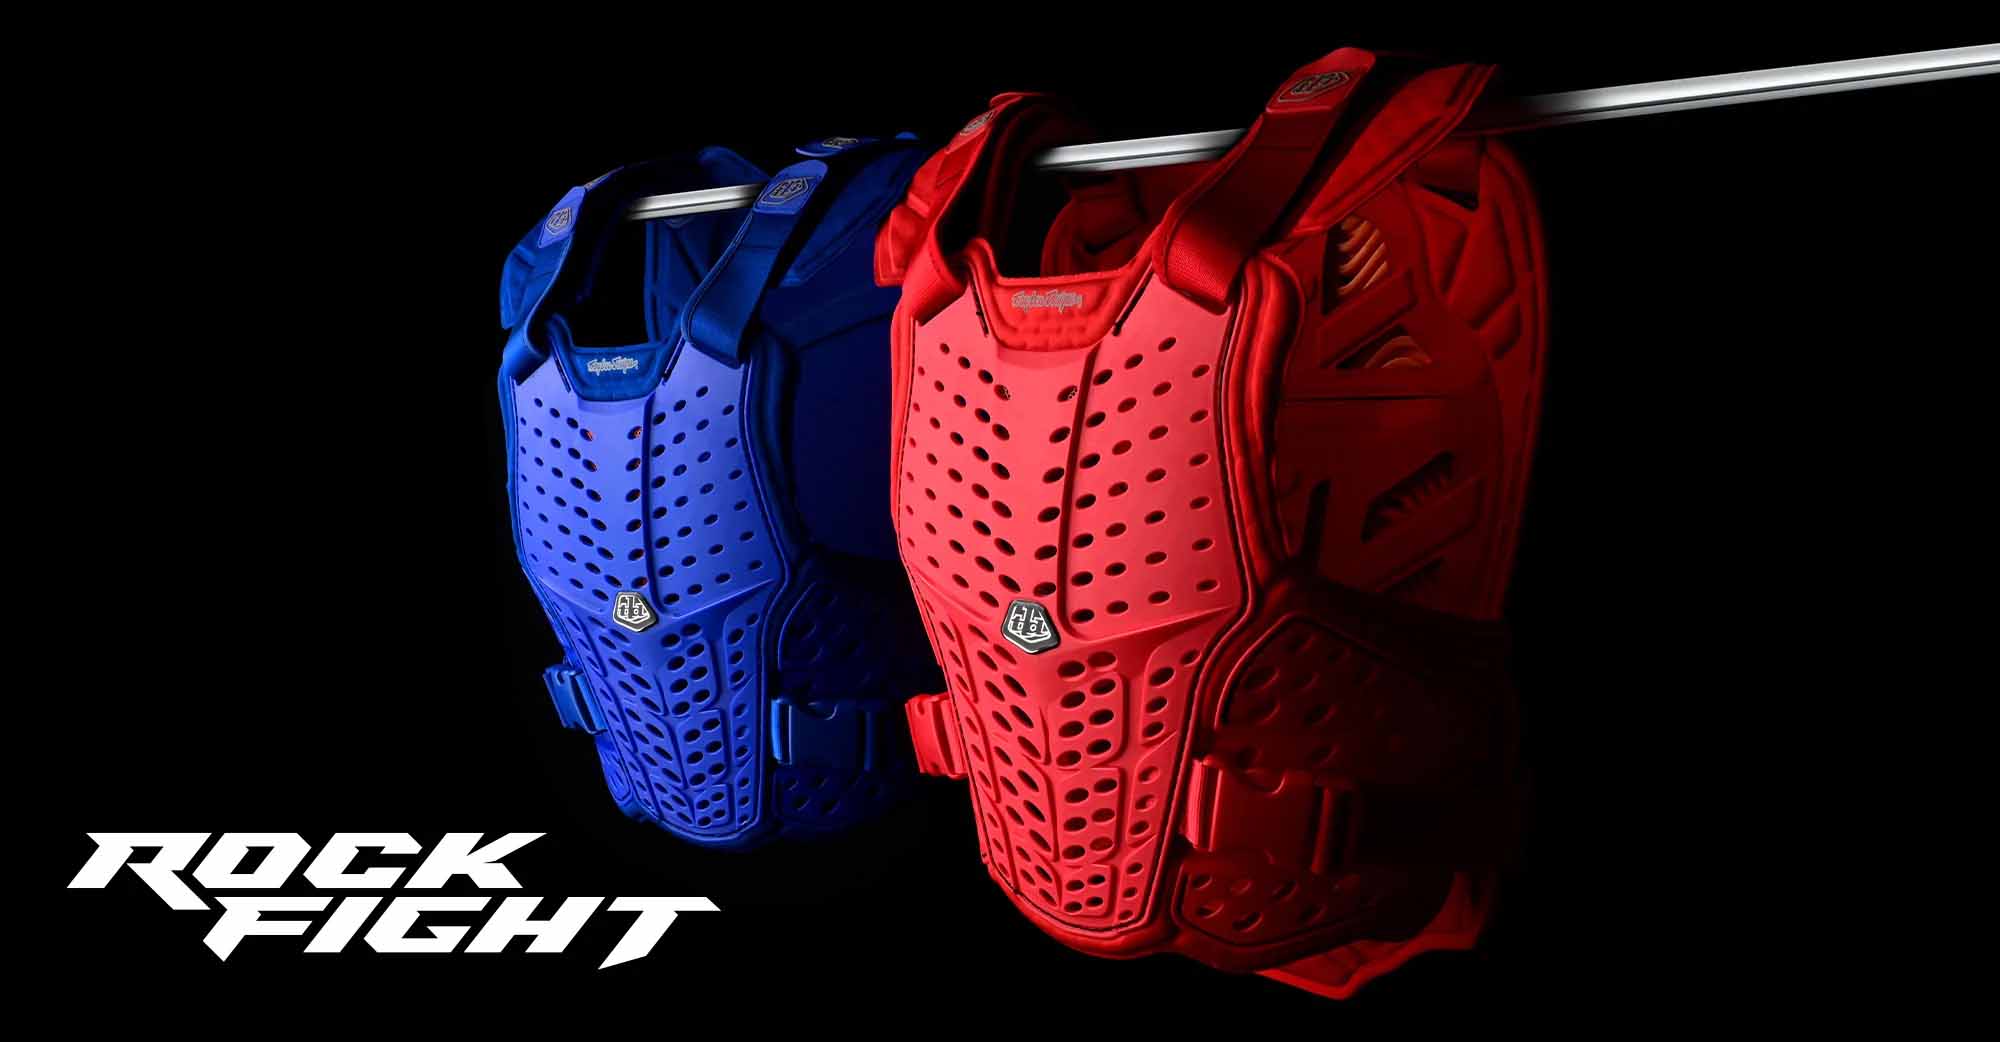 TLD - Rockfight chest protection